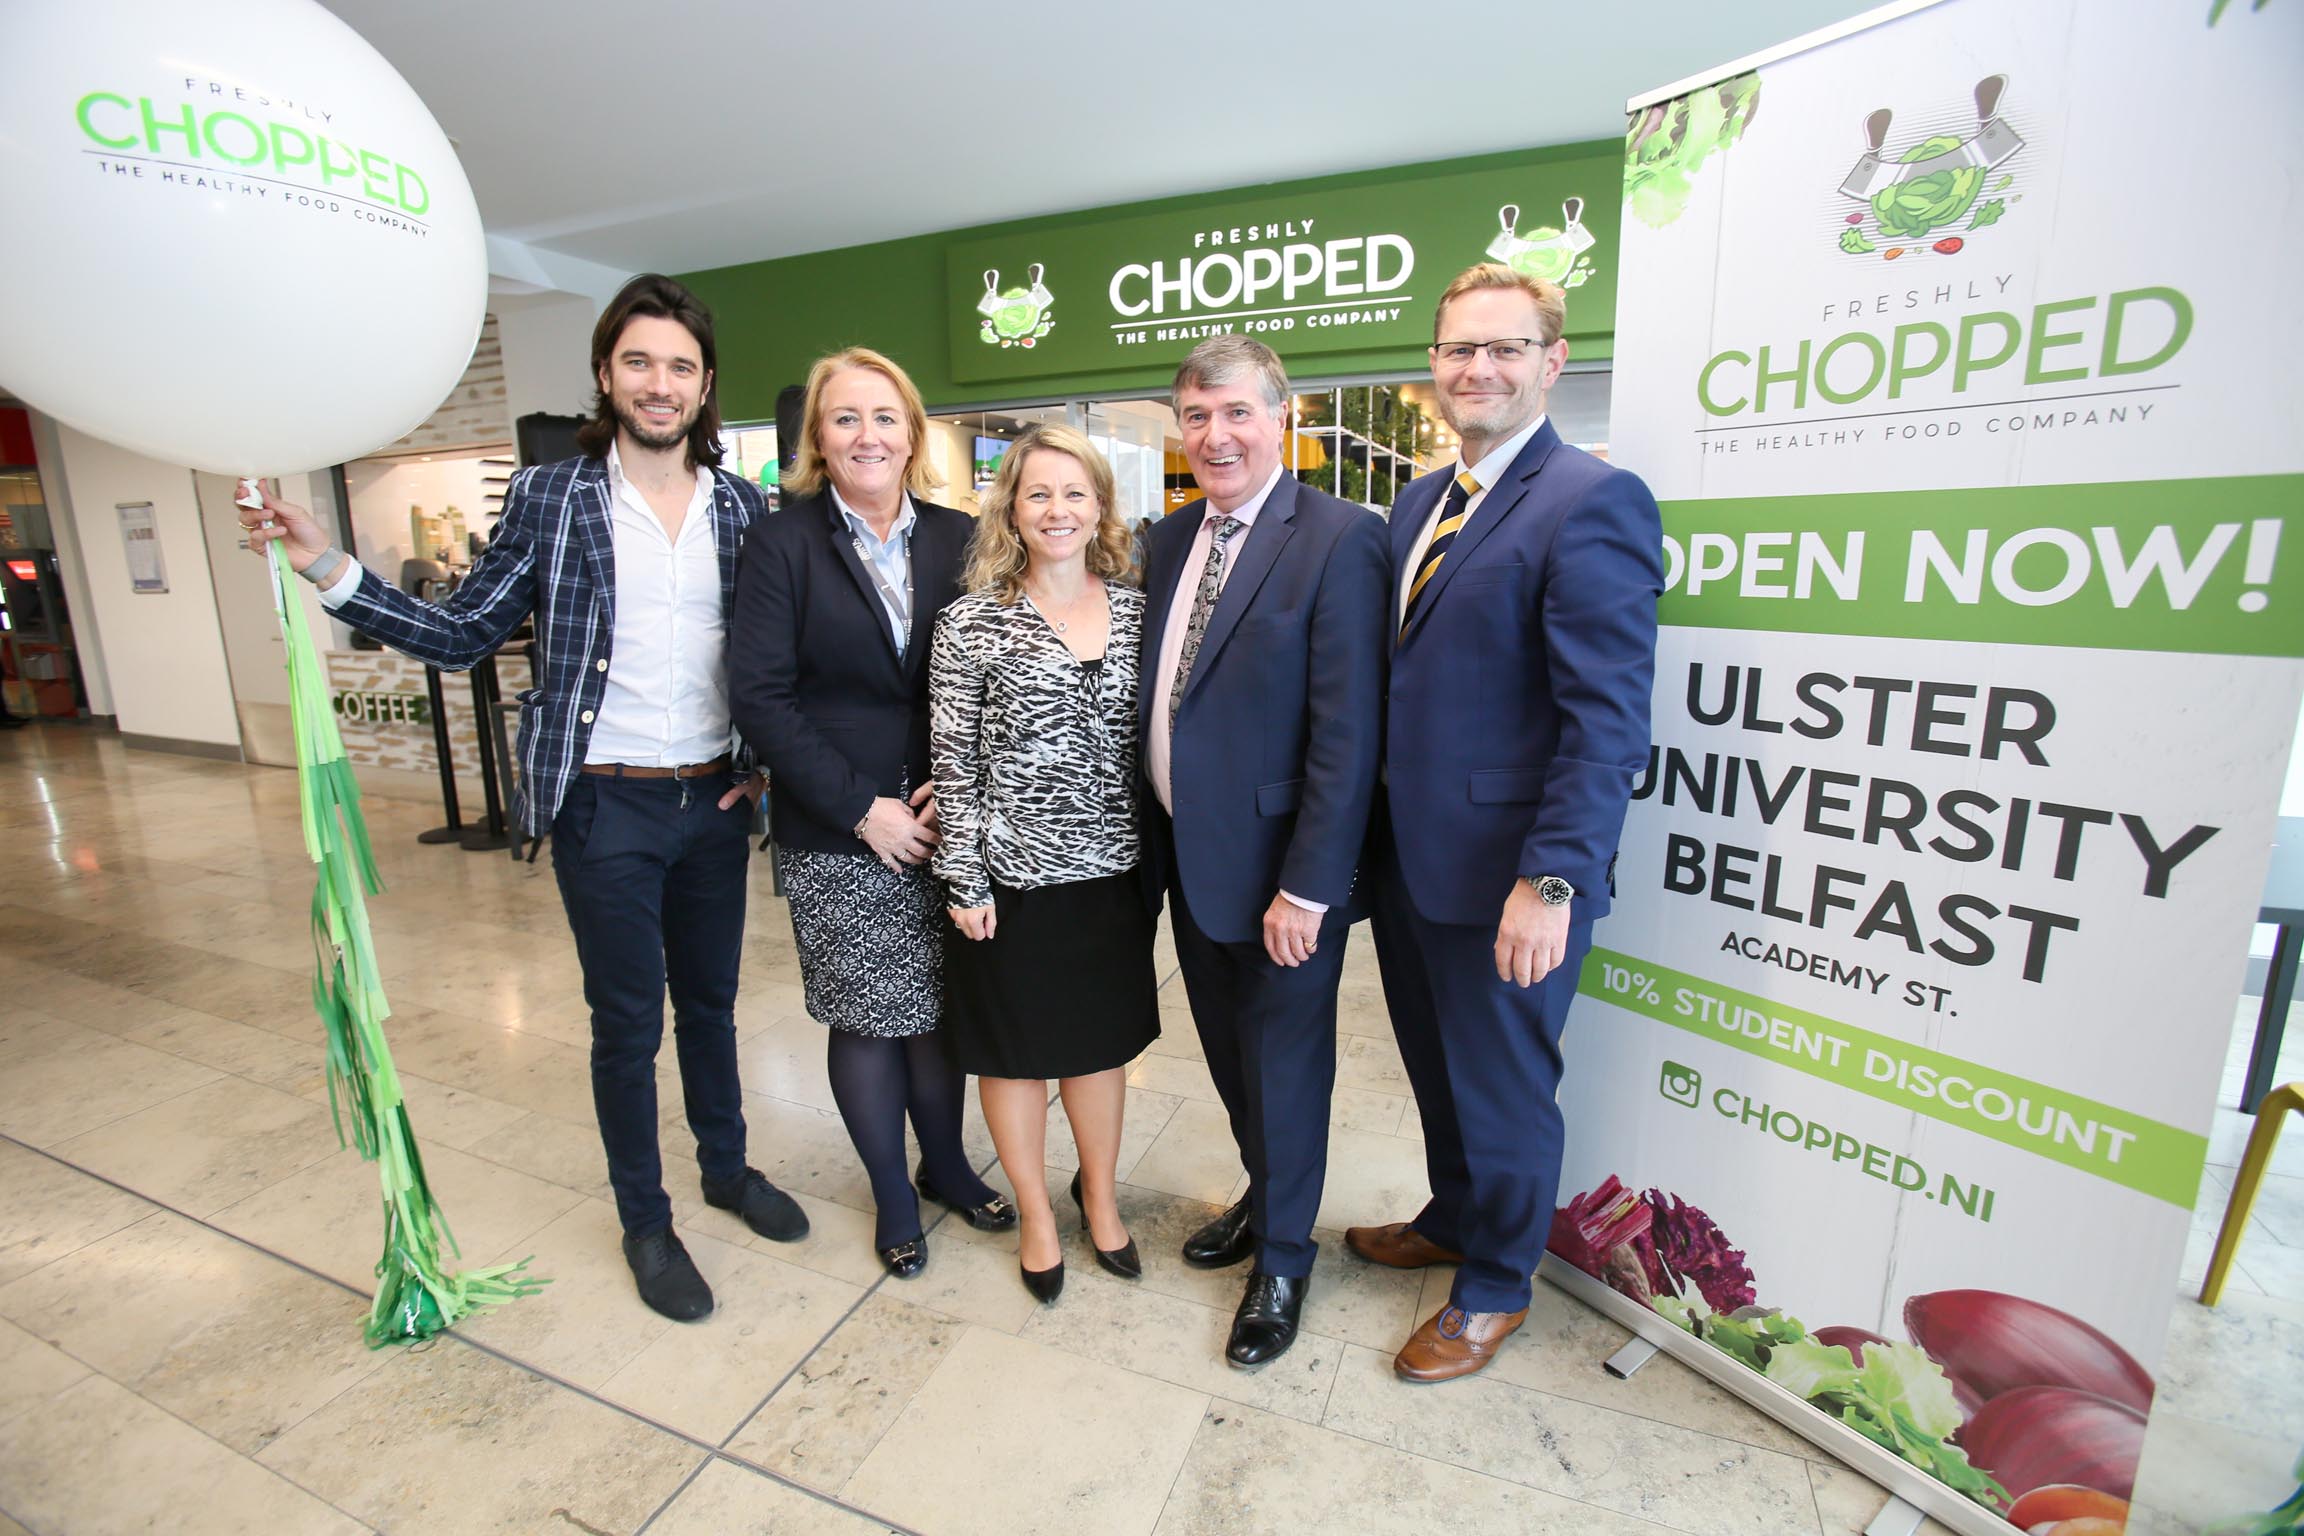 Freshly Chopped officially launches at Ulster University’s Belfast Campus